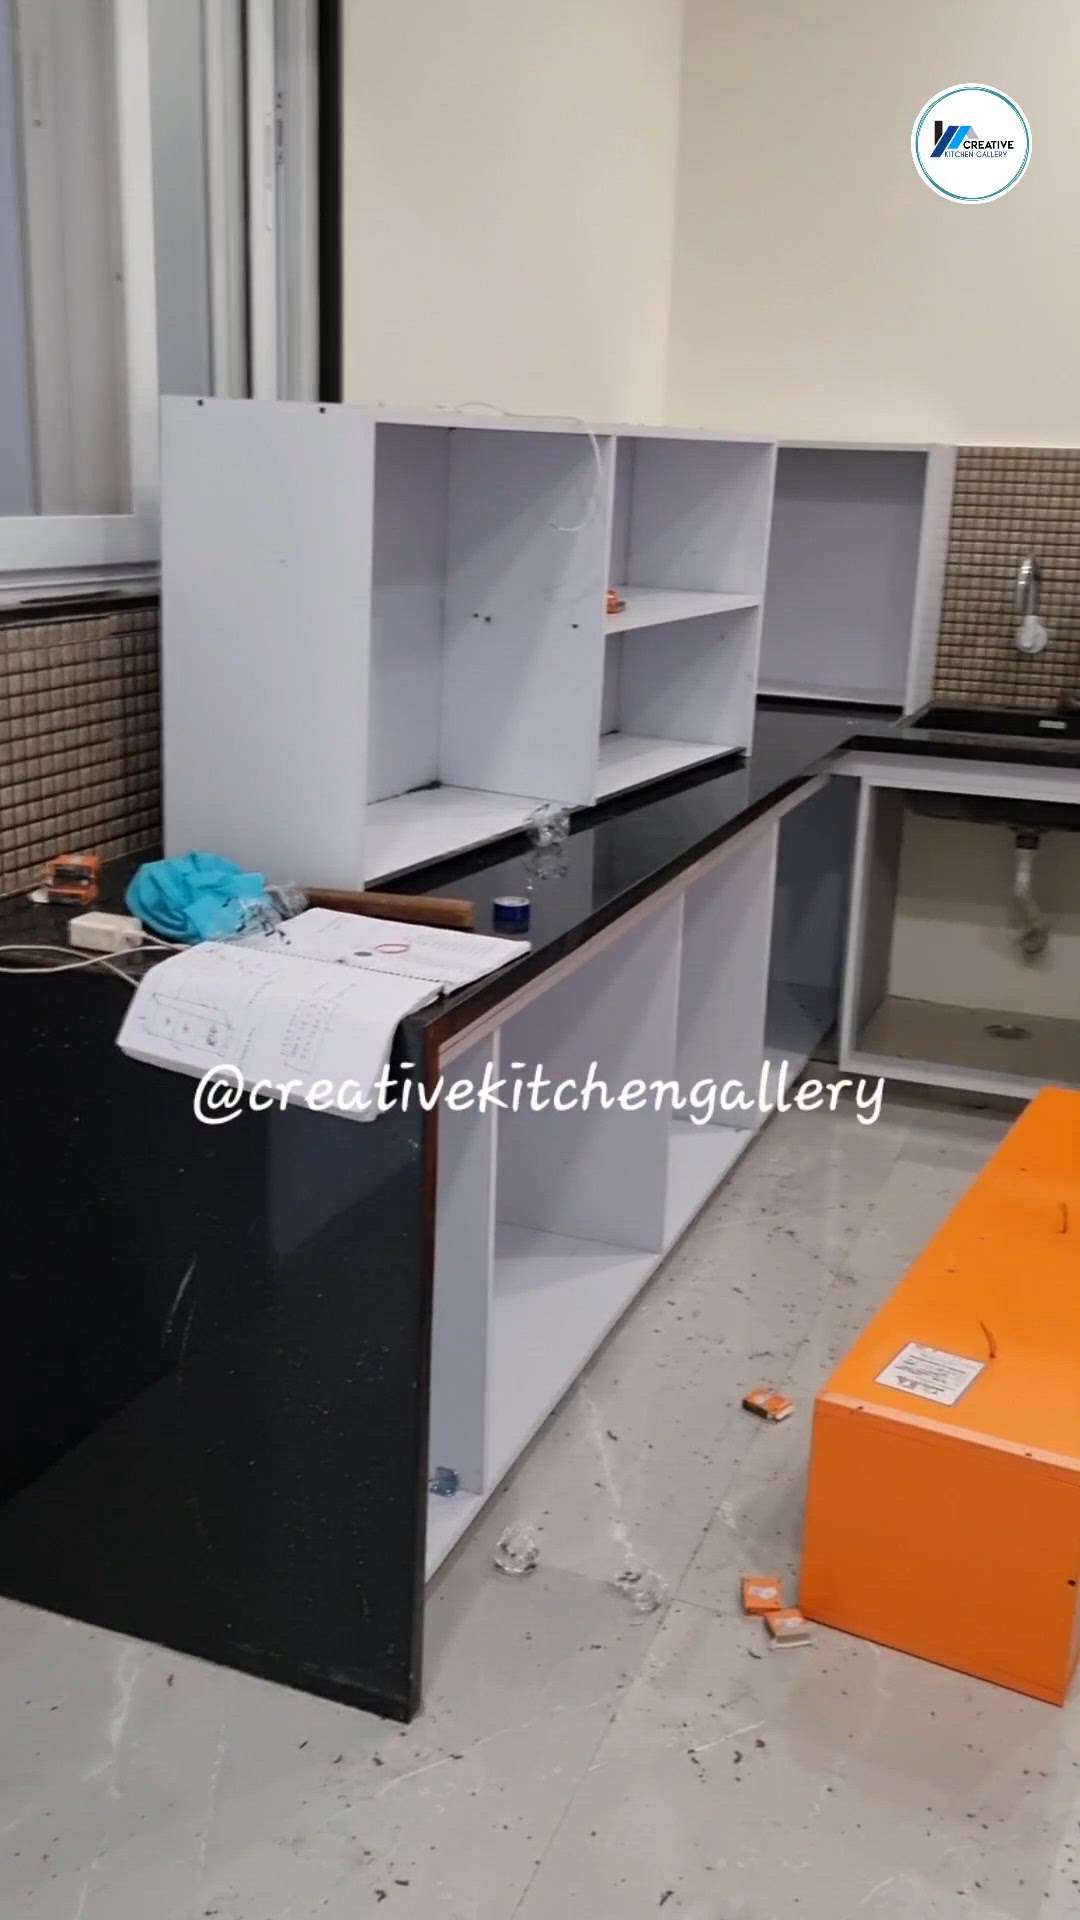 This Modular kitchen completes in only *6* days. Manufactured by Creative Kitchen Gallery, INDORE 
Any Enquiry call Now at +91-8827592545.
C shape  modular kitchen
Design & manufacturing By @creativekitchengallery Indore
CUSTOMER:- aman Ji 
CARCASS:- HDHMR
FINISHES:- Acrylic FINISH @ action_tesa 
HARDWARE:- @HAFAELE 
APPLIANCES :-  @KAFF_CHIMNEY
SITE ADDRESS:- NARIMAN CITY, Indore
.
.
.
.
.
.
.
.
.
.
.
.
.

#kitchendesign #hettichkitchen #indorecity #interiordesign #interiordesigninspirationl 
#Faber #Indore #ebcofindia #women #creativekitchengallery #fabercastell #kitchendesigninspiration #Elica #internationalwomensday2021 #hefele #hettich #faber #Yoga2021